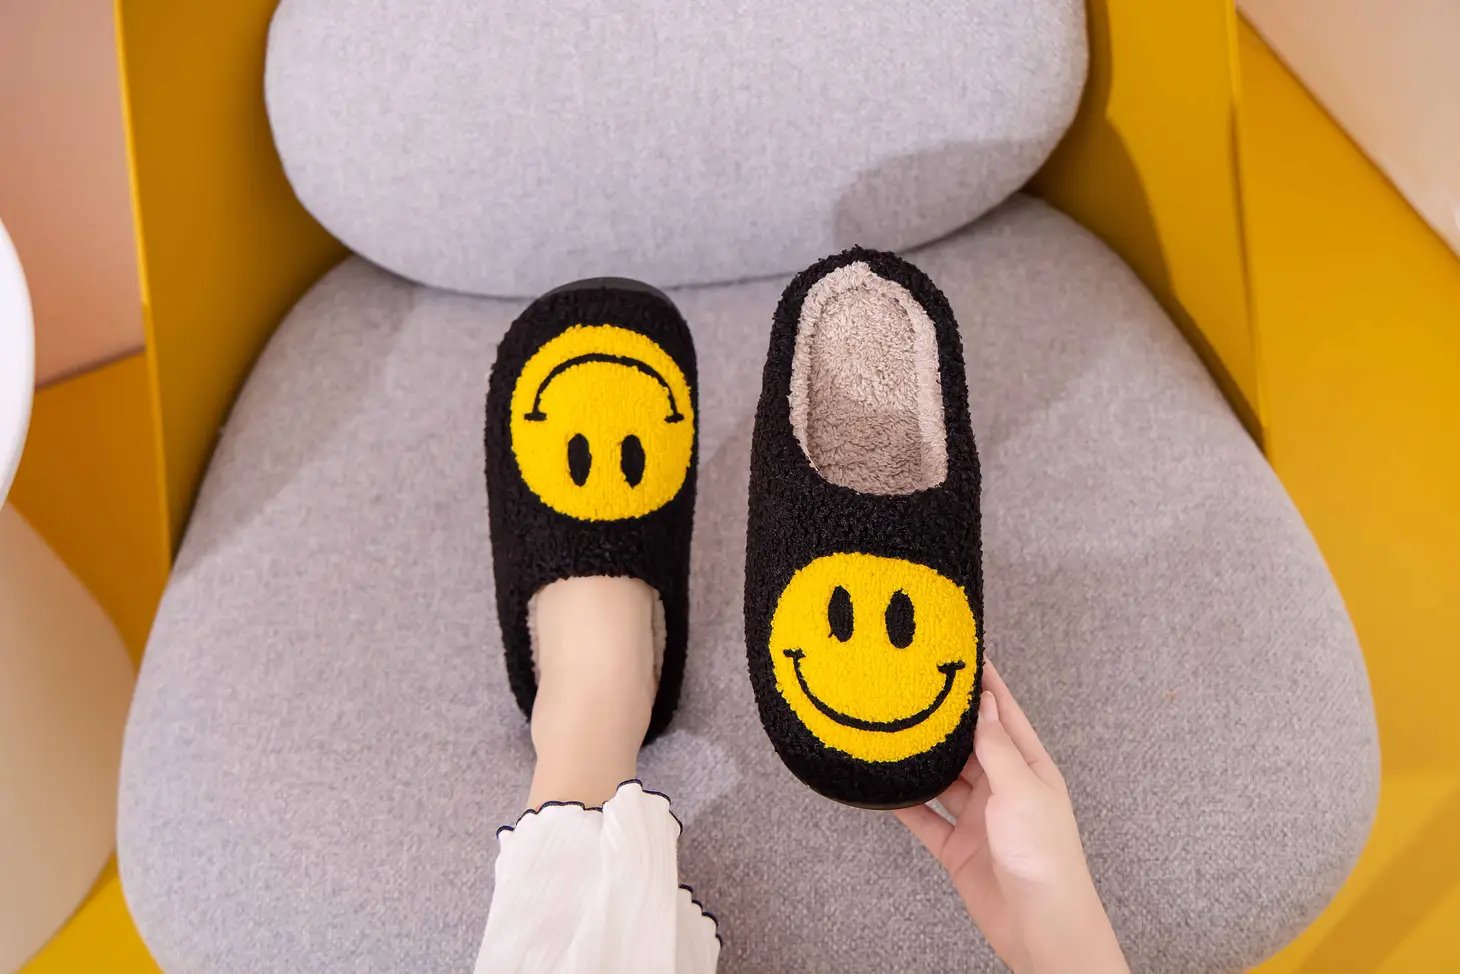 Smiley Face Fluffy Slippers (Black) - Small (5.5-6.5/37-38) - Slippers